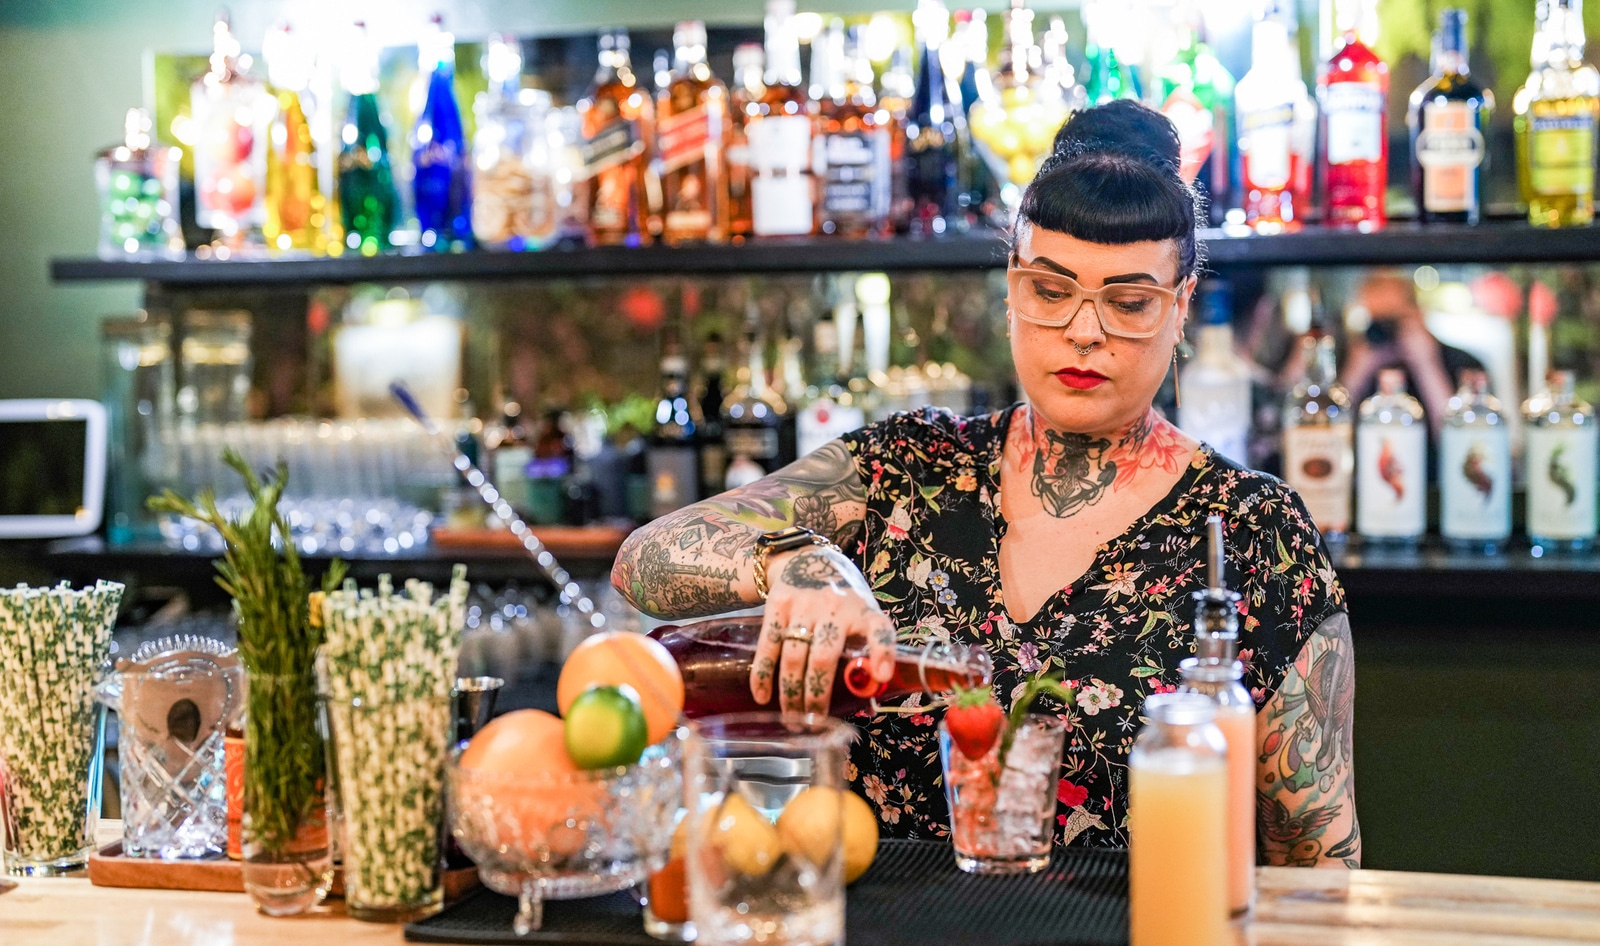 DC Just Got Its First Vegan Bar With Aquafaba Foam-Topped Cocktails